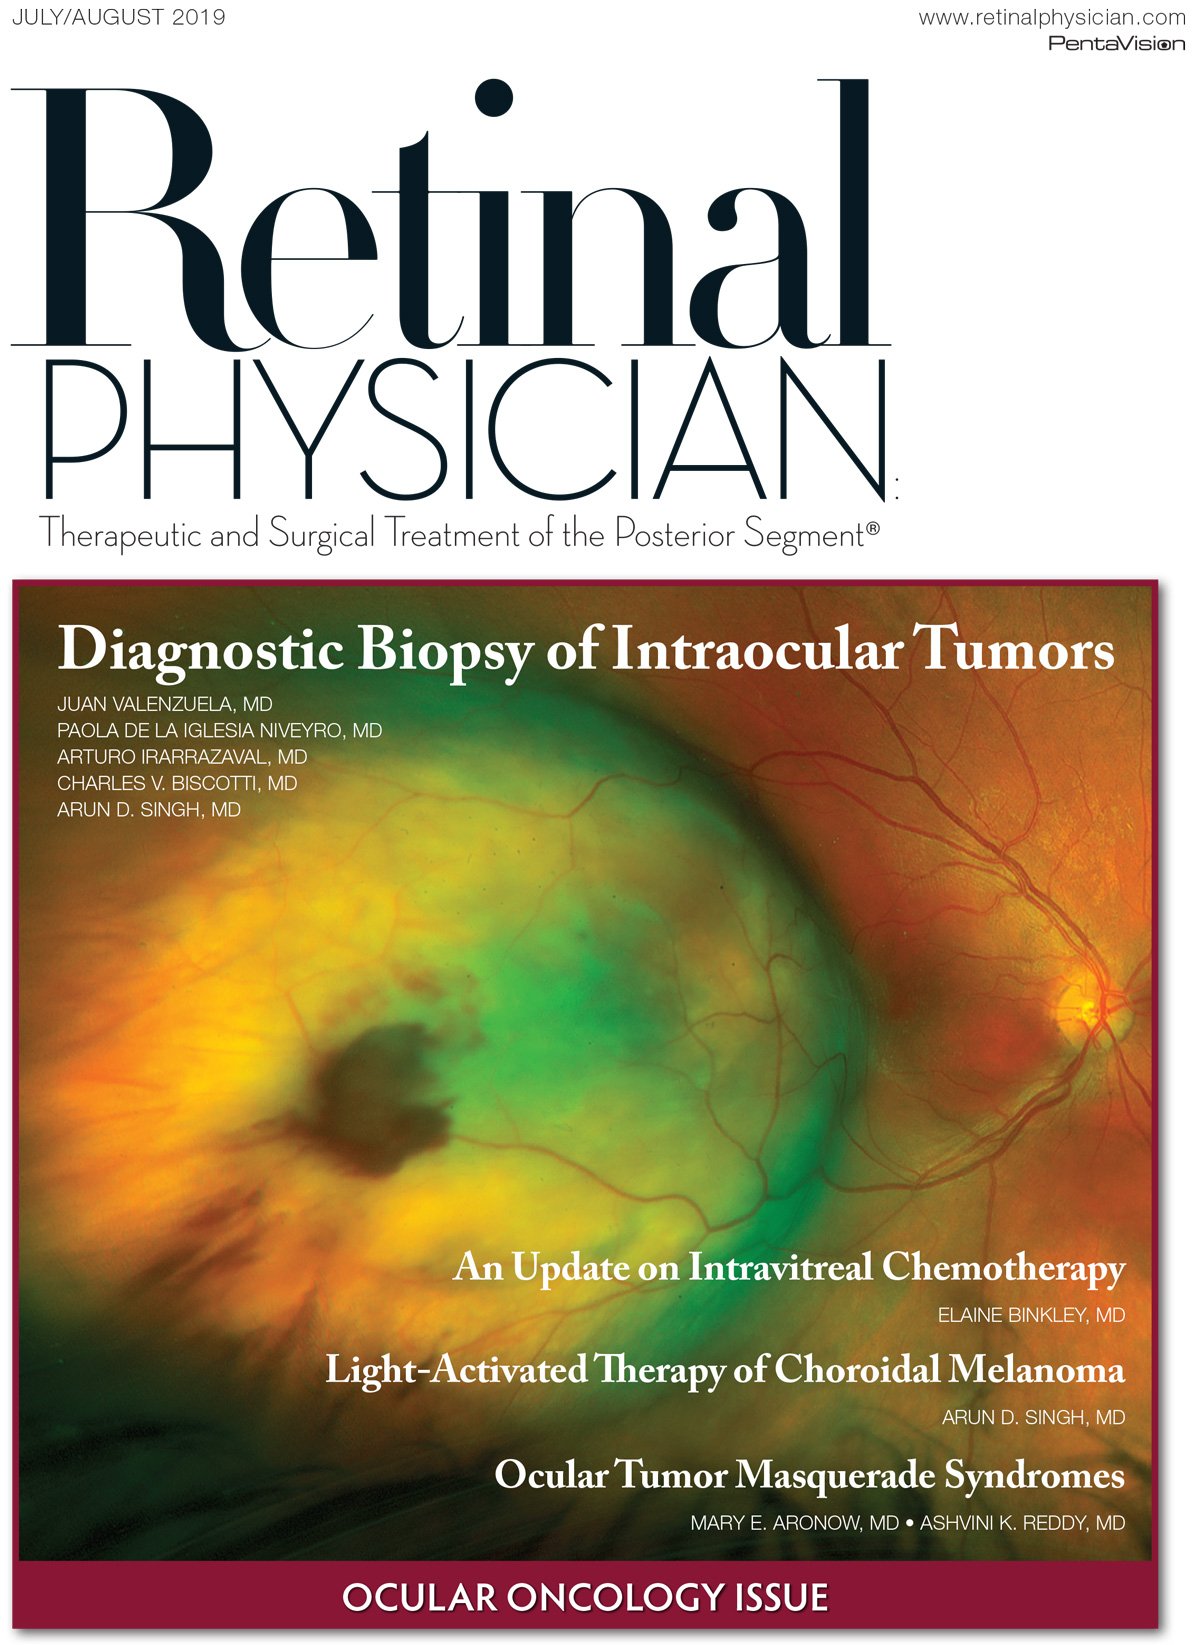 Retinal Physician July/August 2019 image